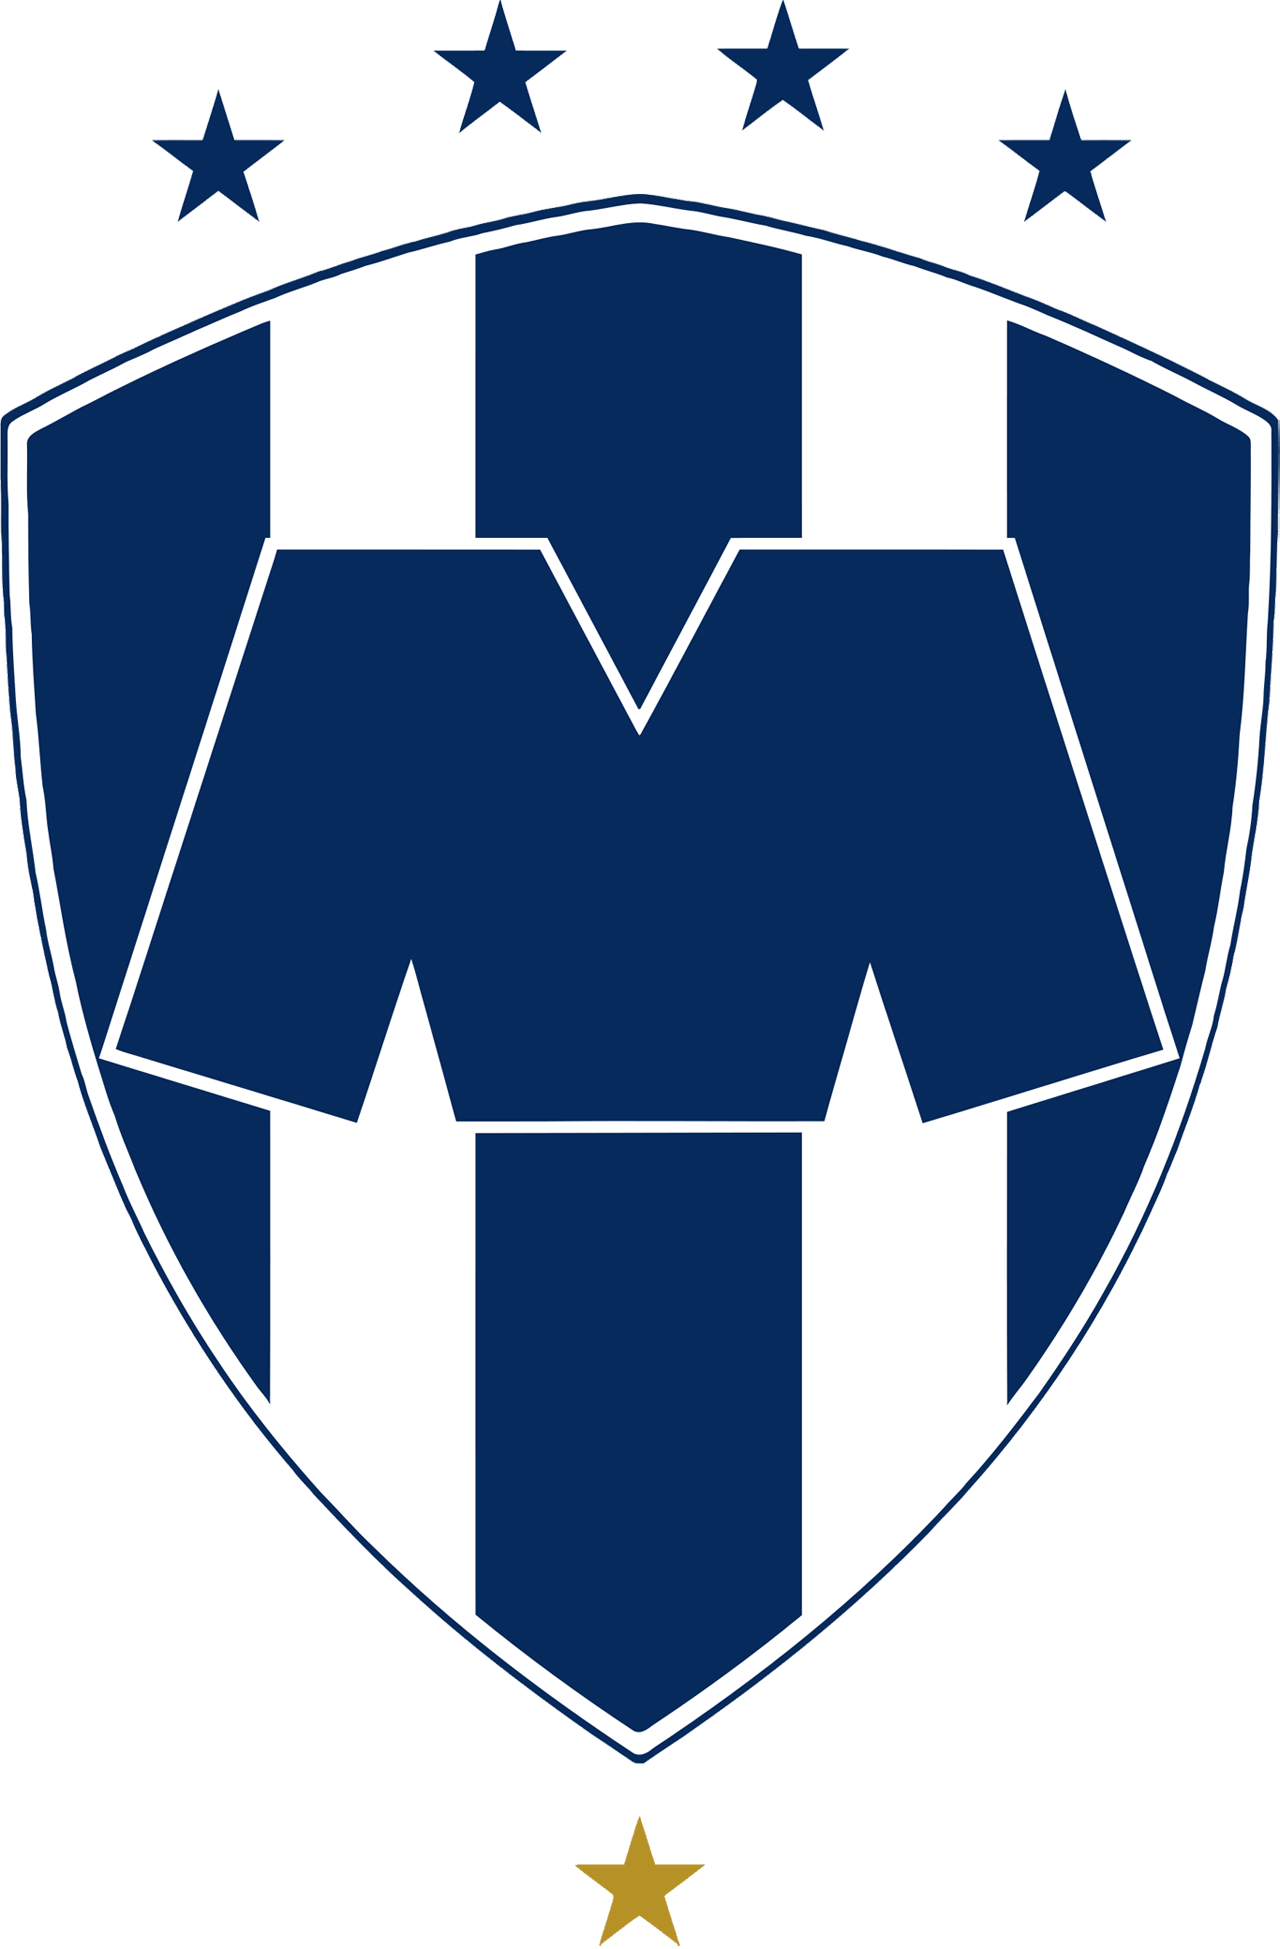 cf monterrey logo png wallpaper, Football Picture and Photo